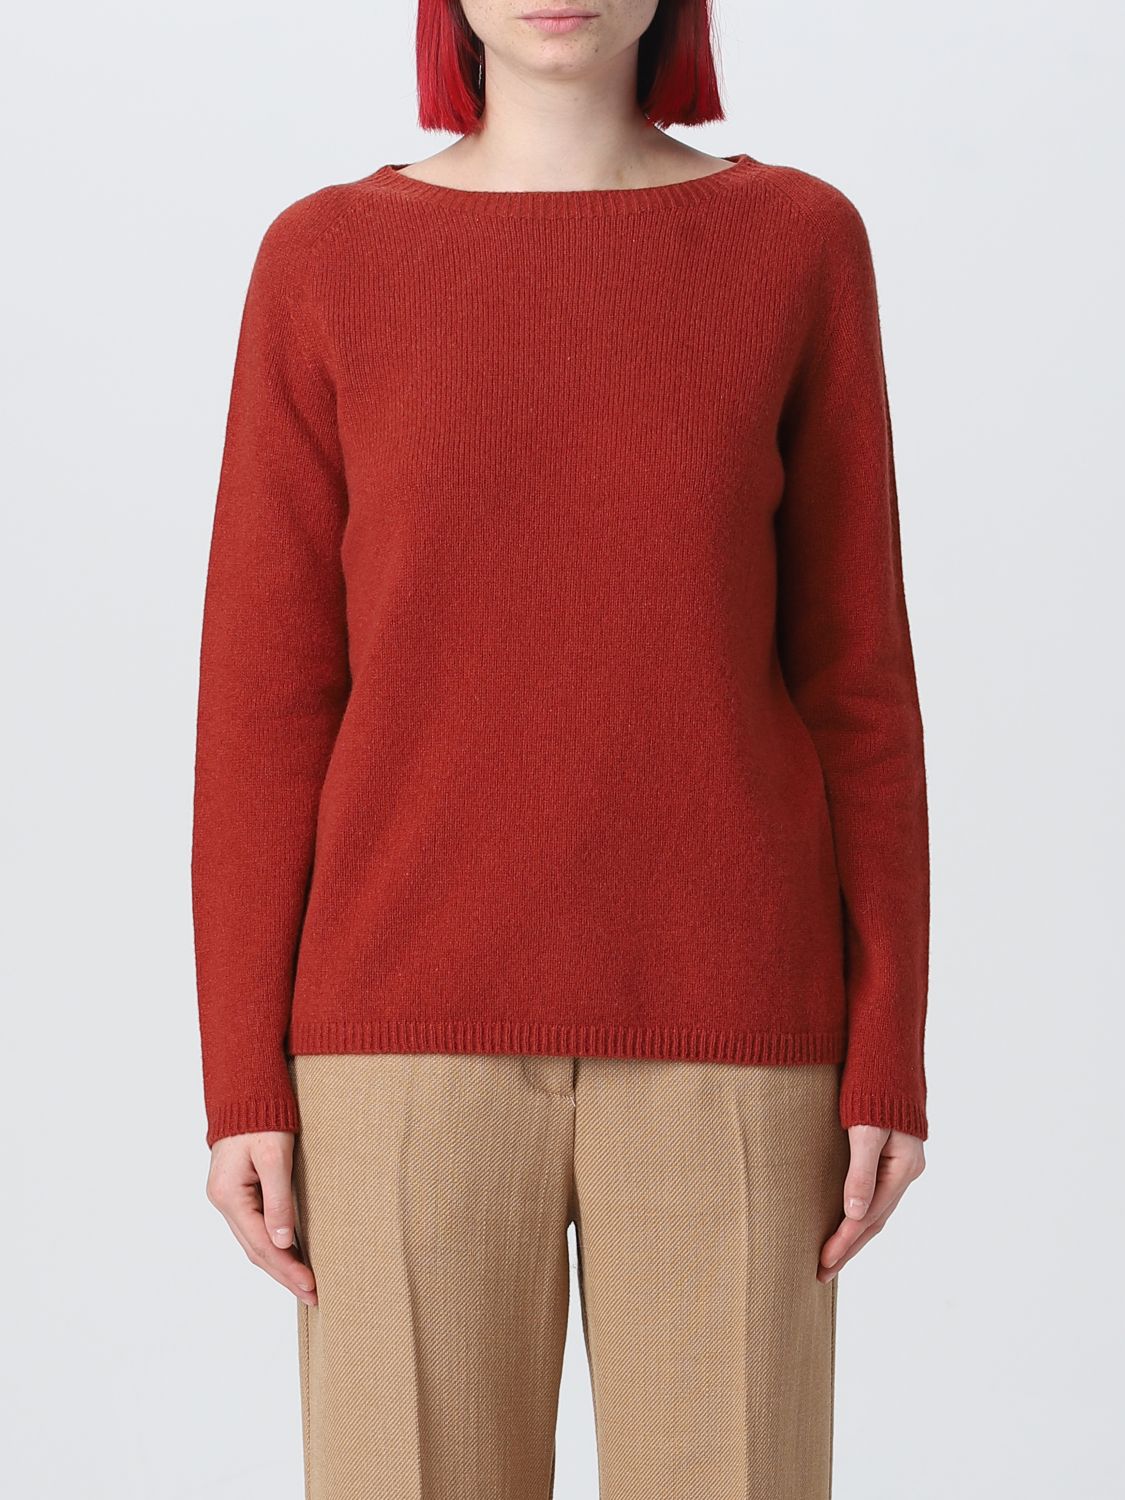 Shop 's Max Mara S Max Mara Sweater In Wool And Cashmere In Clay Color